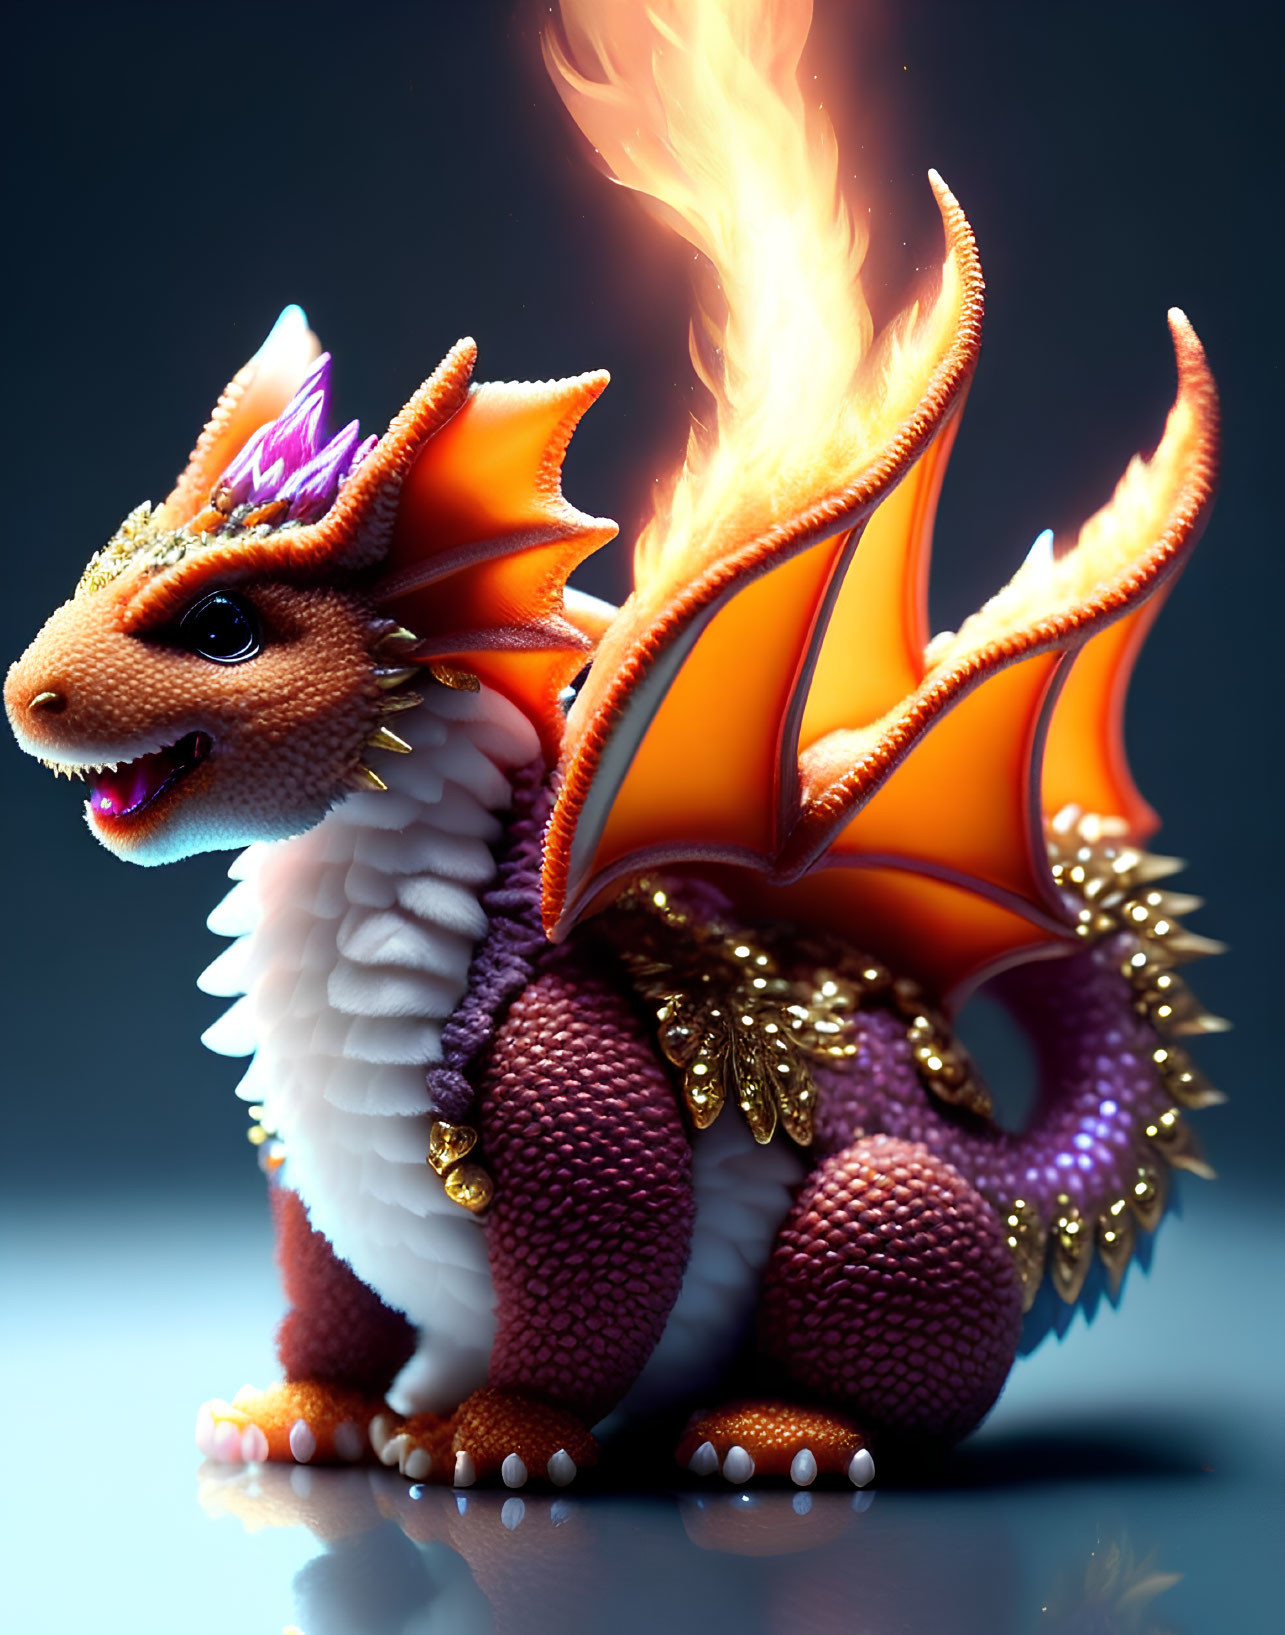 Colorful Dragon Figurine with Orange Flames on Cool Background